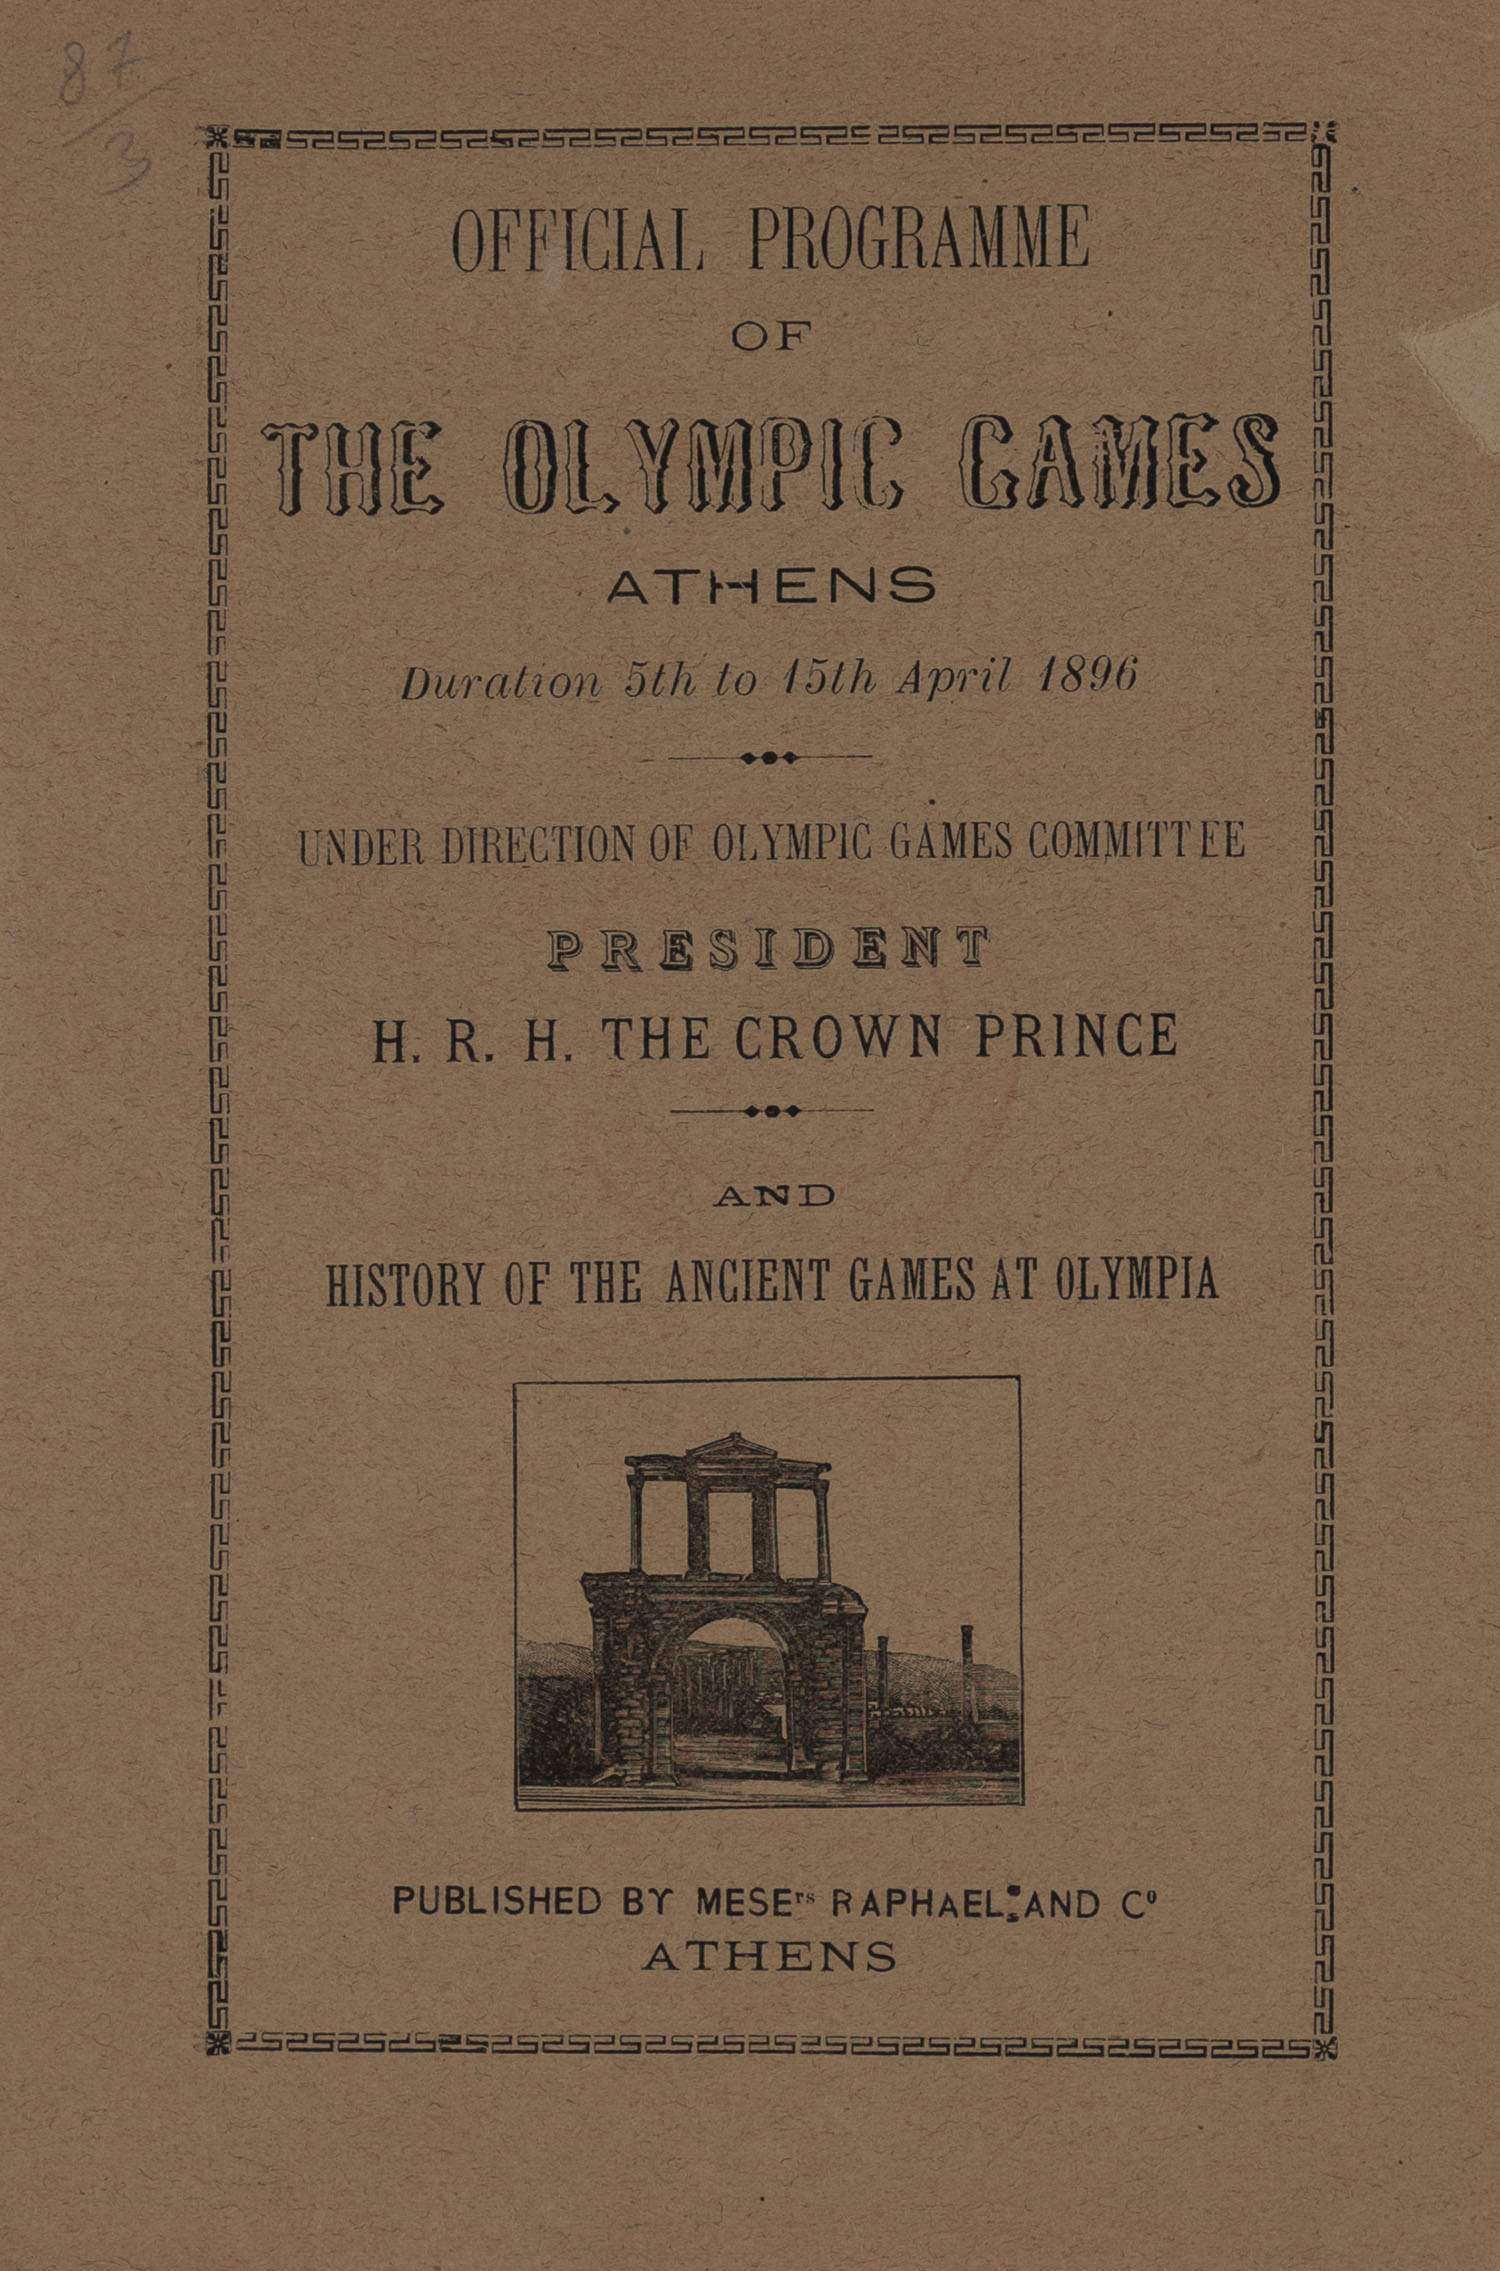 Official programme of the Olympic Games, Athens, duration 5th to 15th April 1896. Under direction of Olympic Games Committee, President H. R. H. the Crown Prince. And history of the ancient Games at Olympia. 